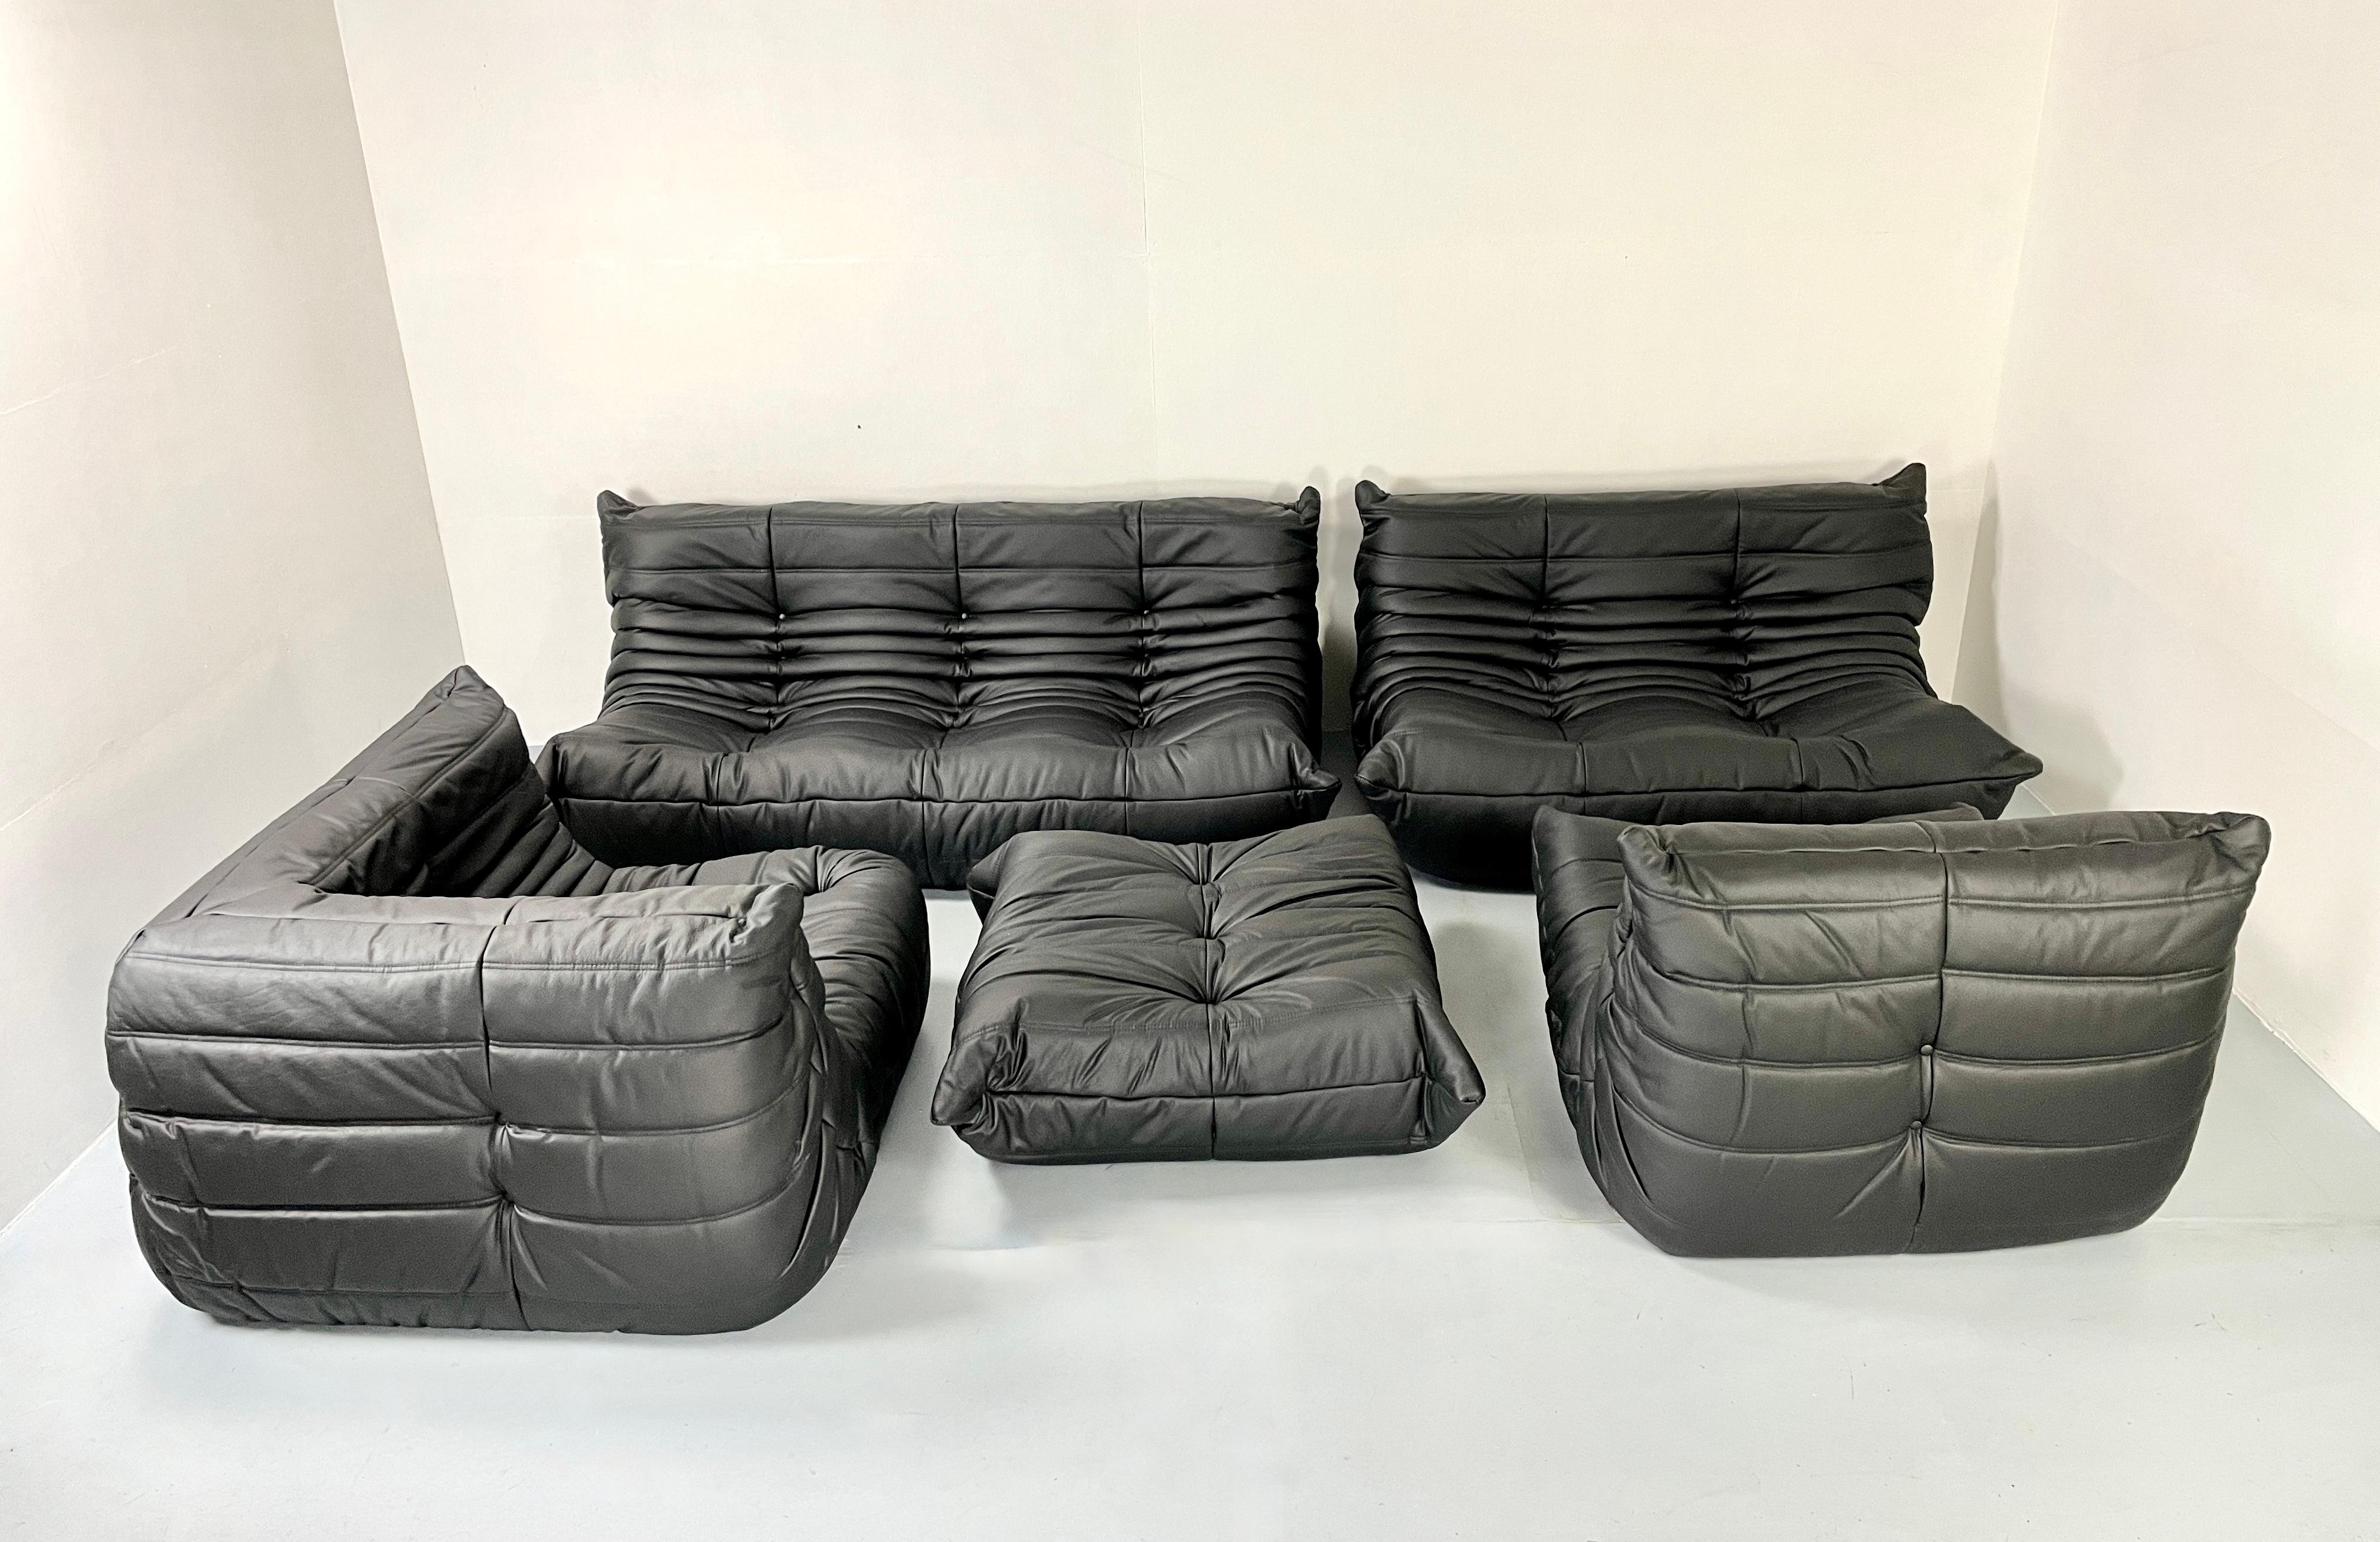 This iconic set offers an unique seating comfort. It is a design by Michel Ducaroy for Ligne Roset. This large modular set is can be configured into one large corner sofa or split for a multitude of seating arrangements. The color of the ensemble is